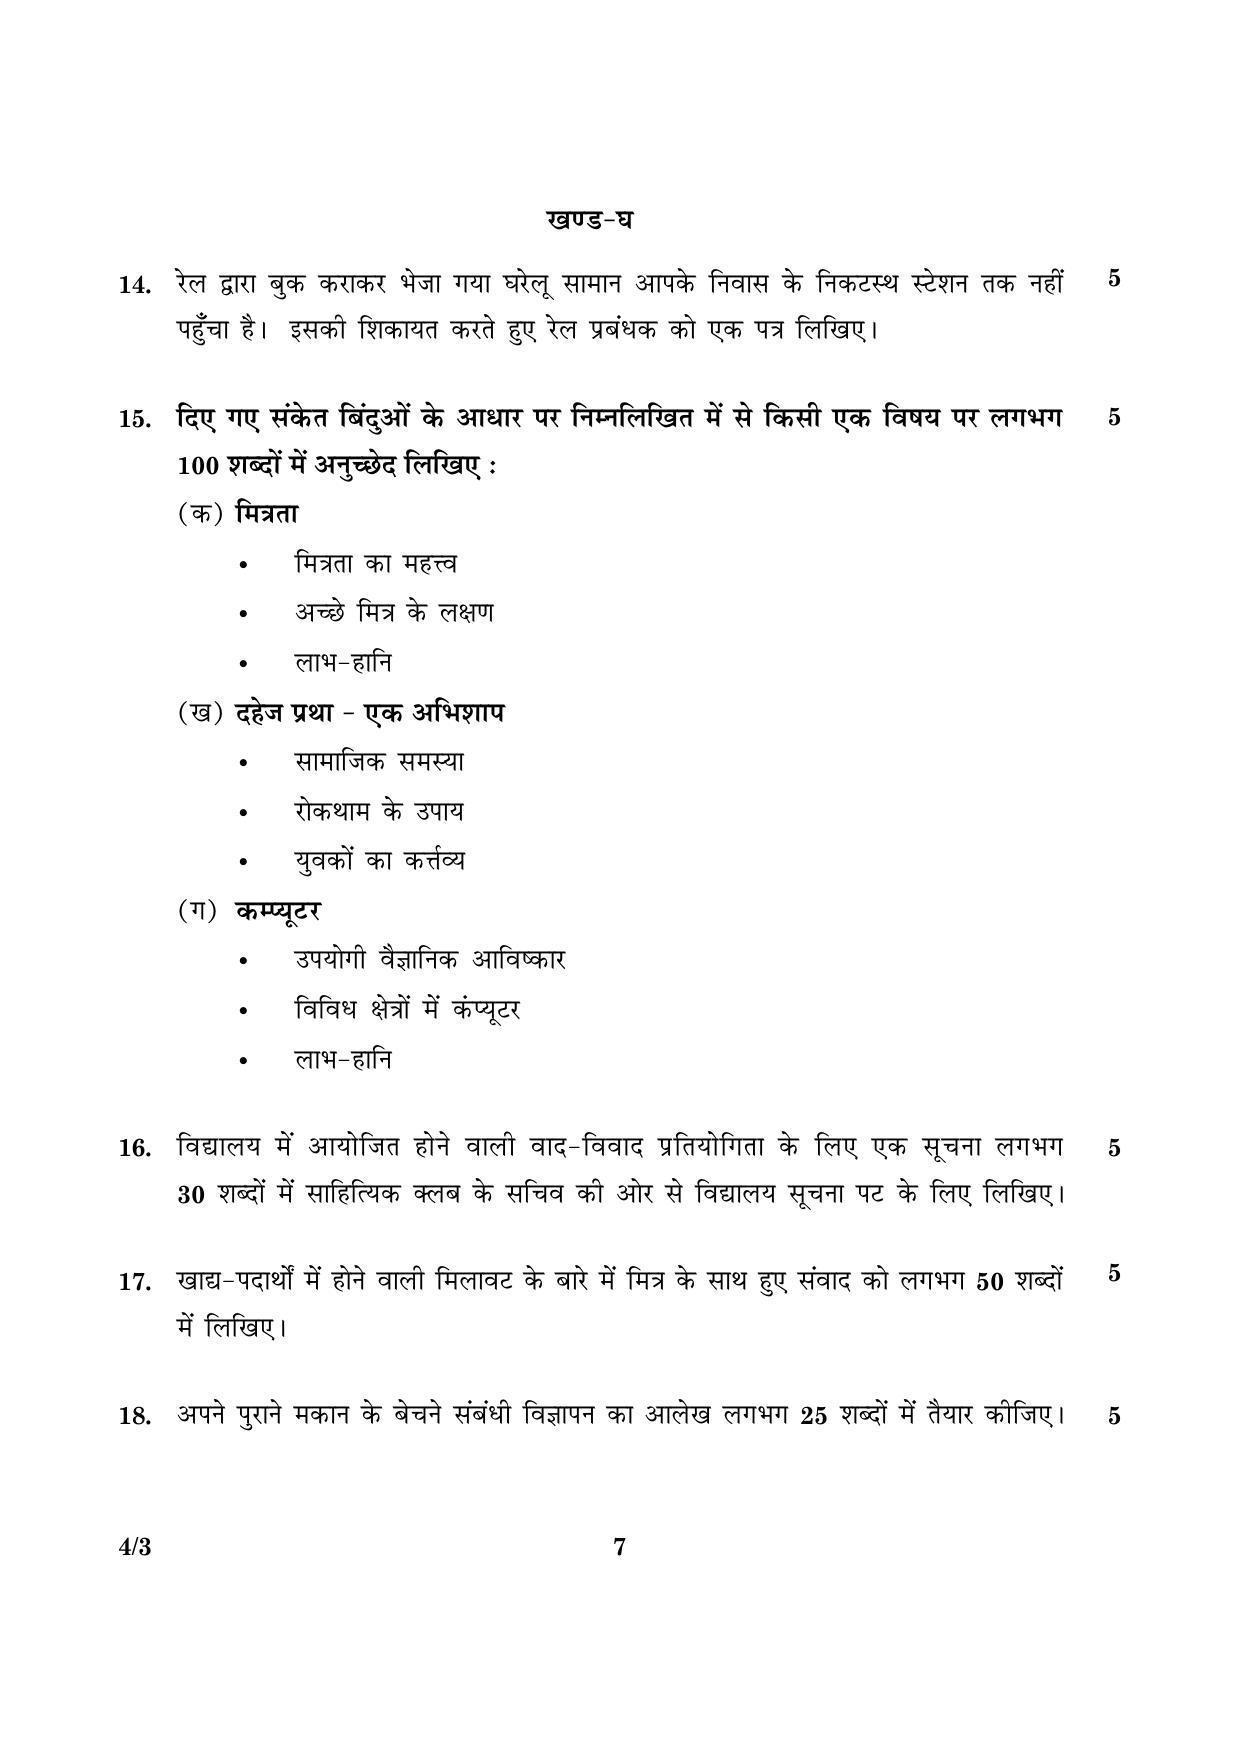 CBSE Class 10 004 Set 3 Hindi Course B 2016 Question Paper - Page 7